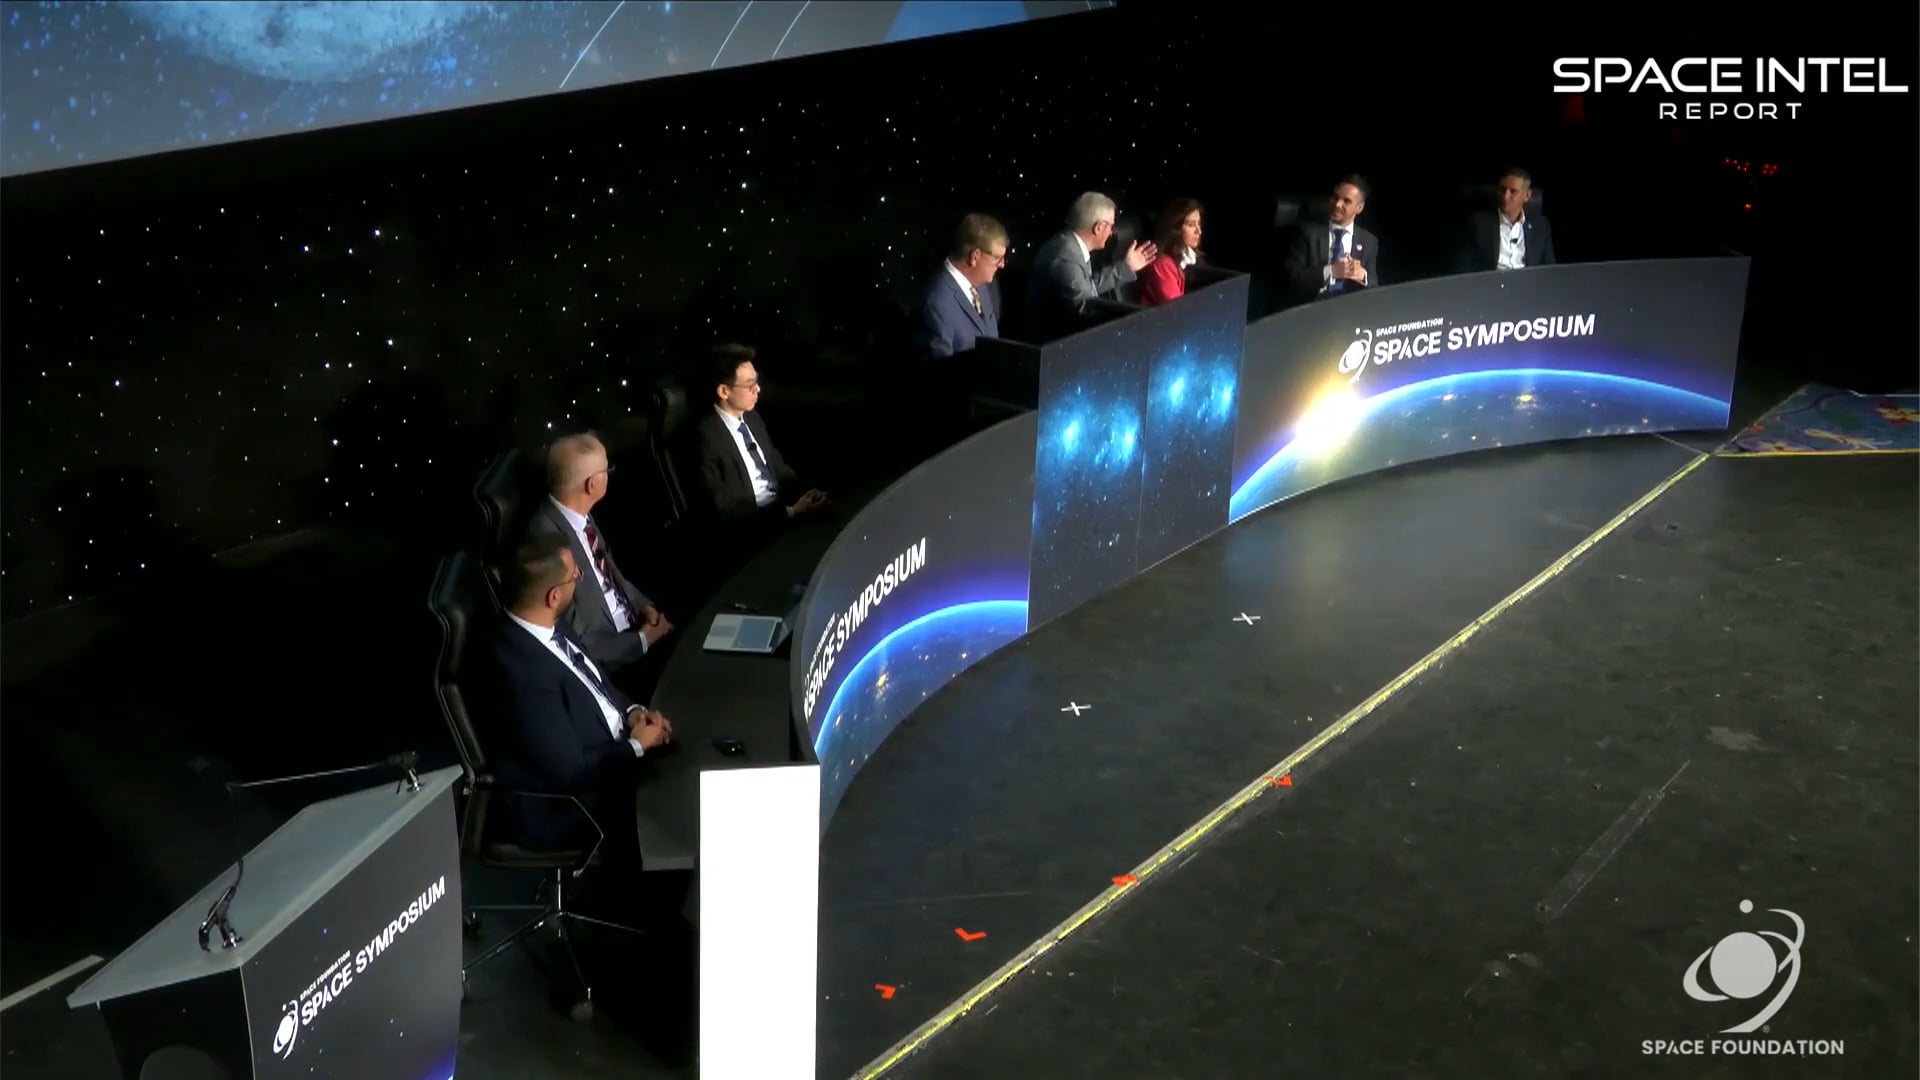 International members of the world's space community share the advancements made and challenges ahead for nations to watch